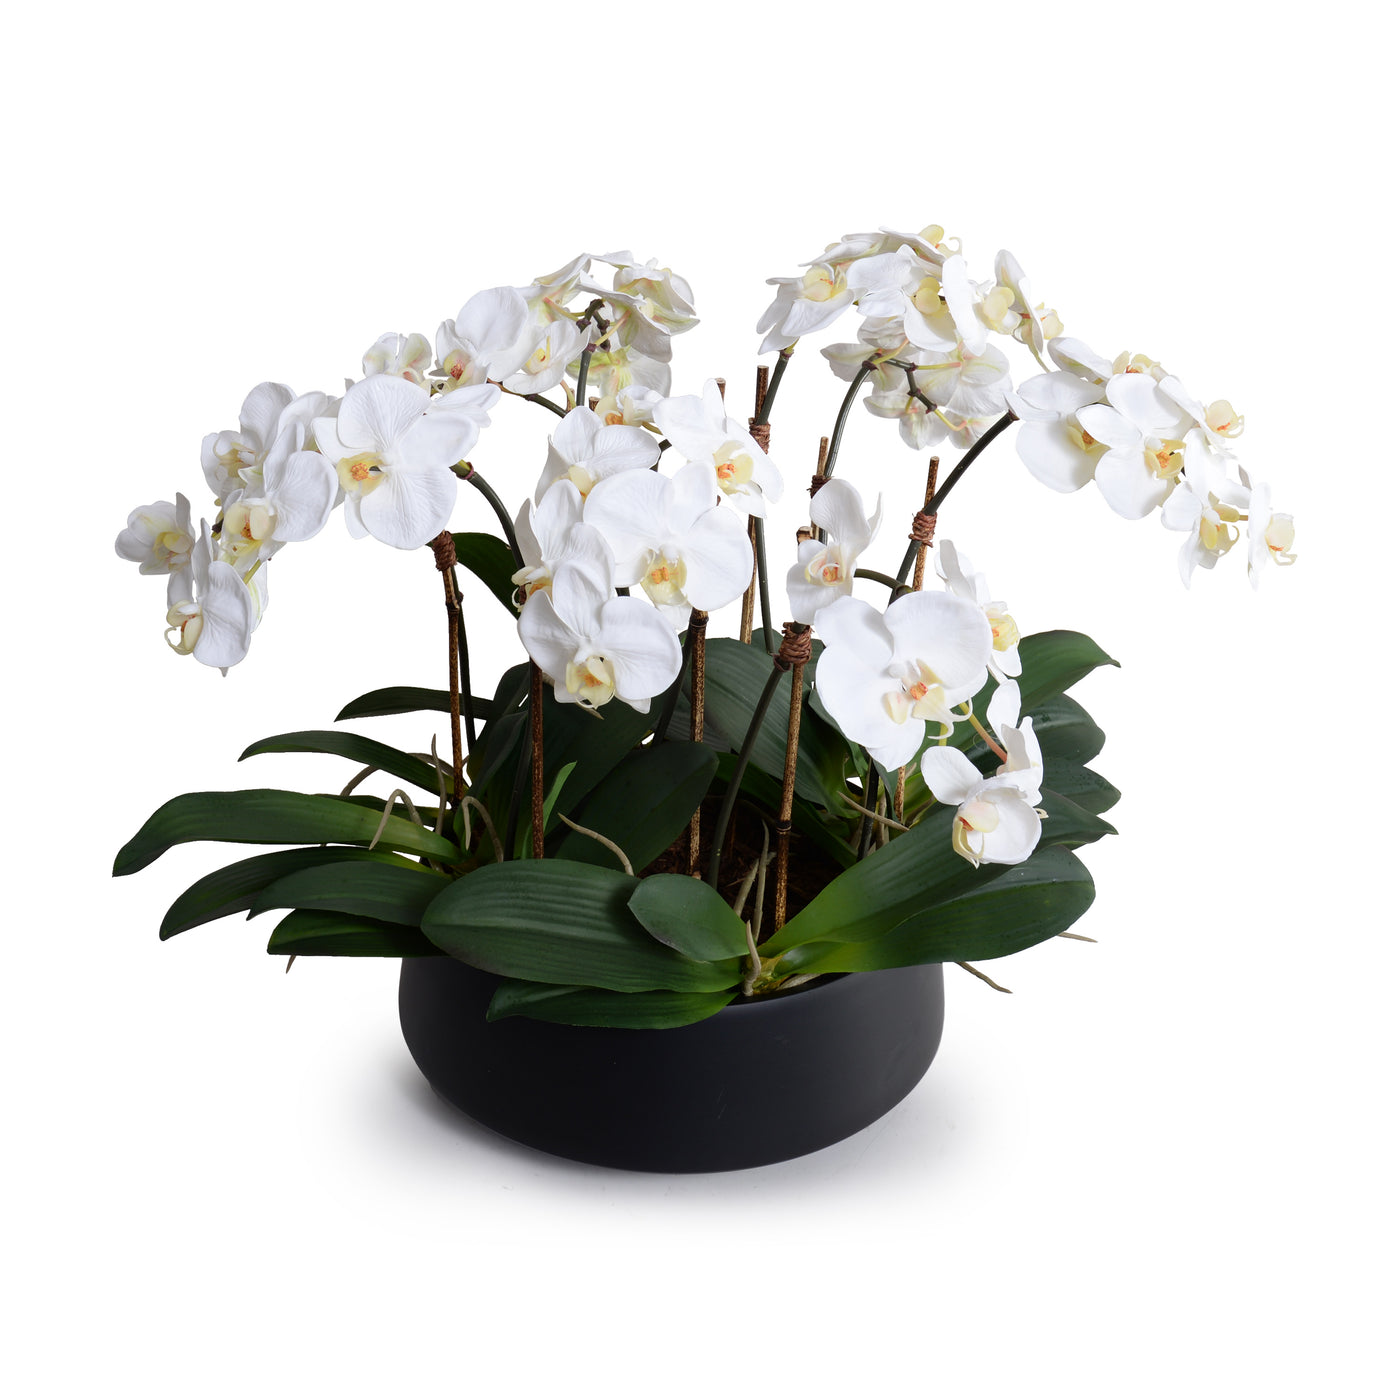 Phalaenopsis Orchid Centerpiece in Black Bowl - White